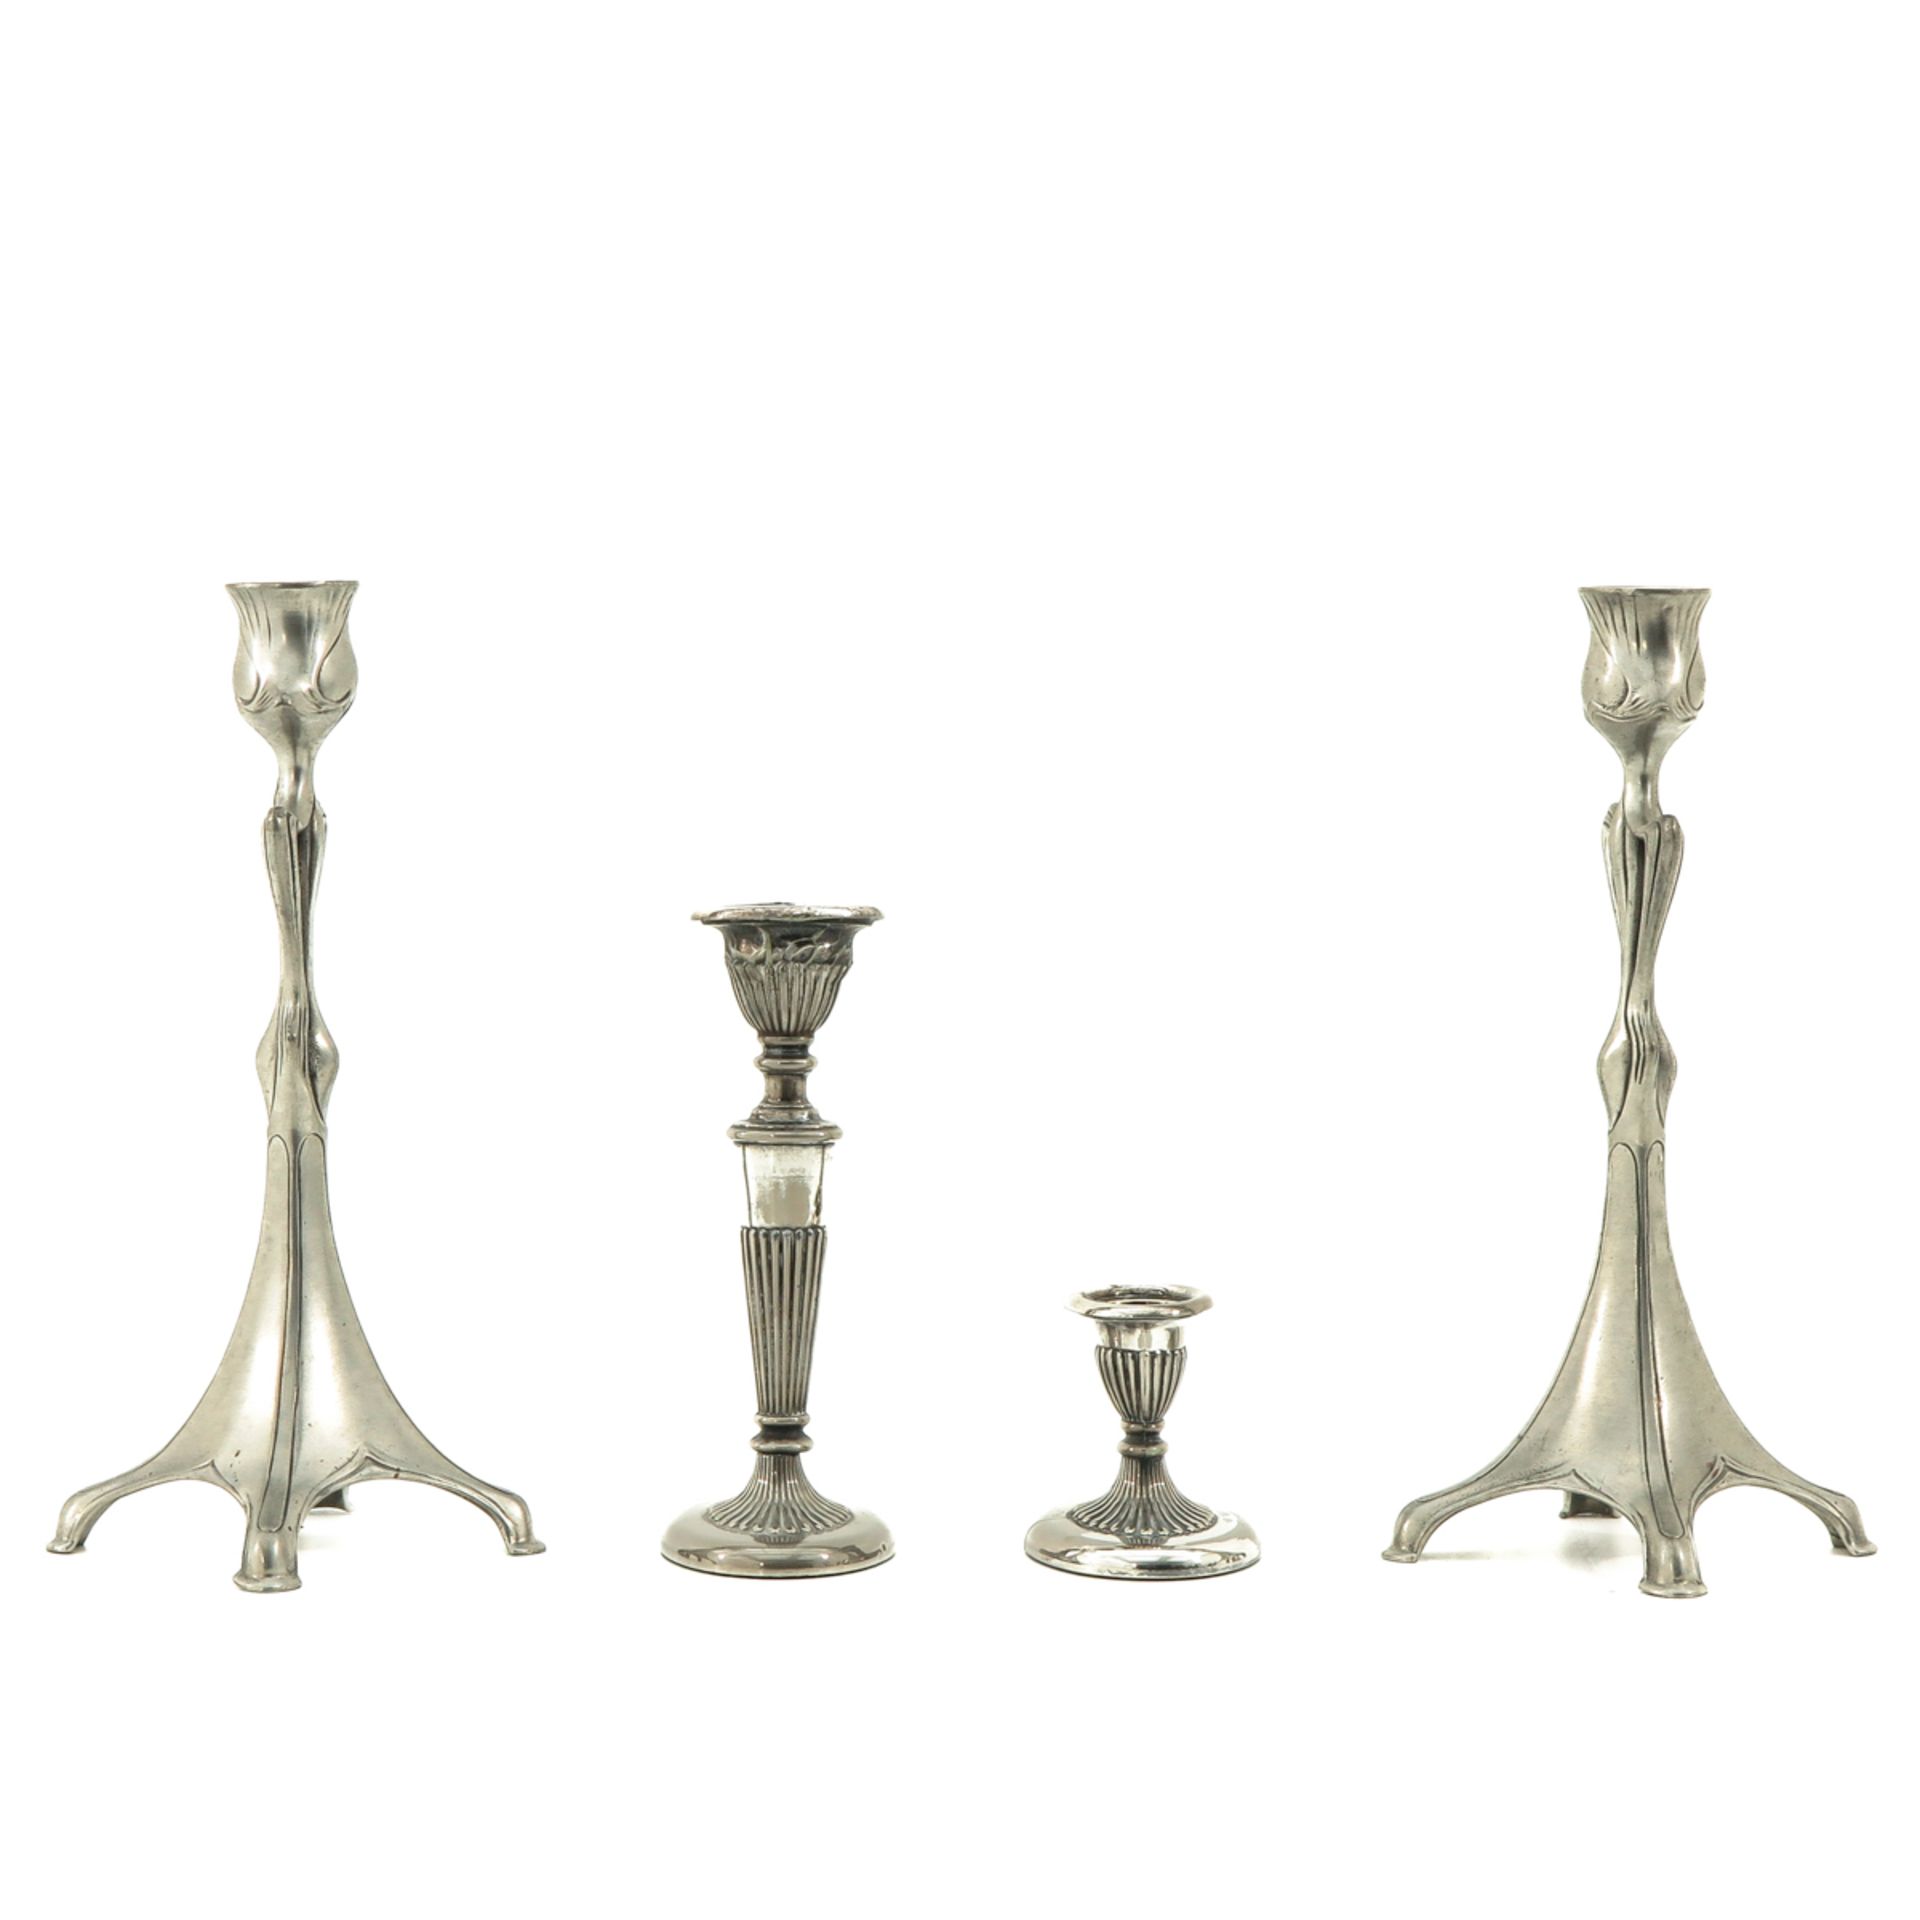 A Lot of 4 Candlesticks - Image 4 of 10